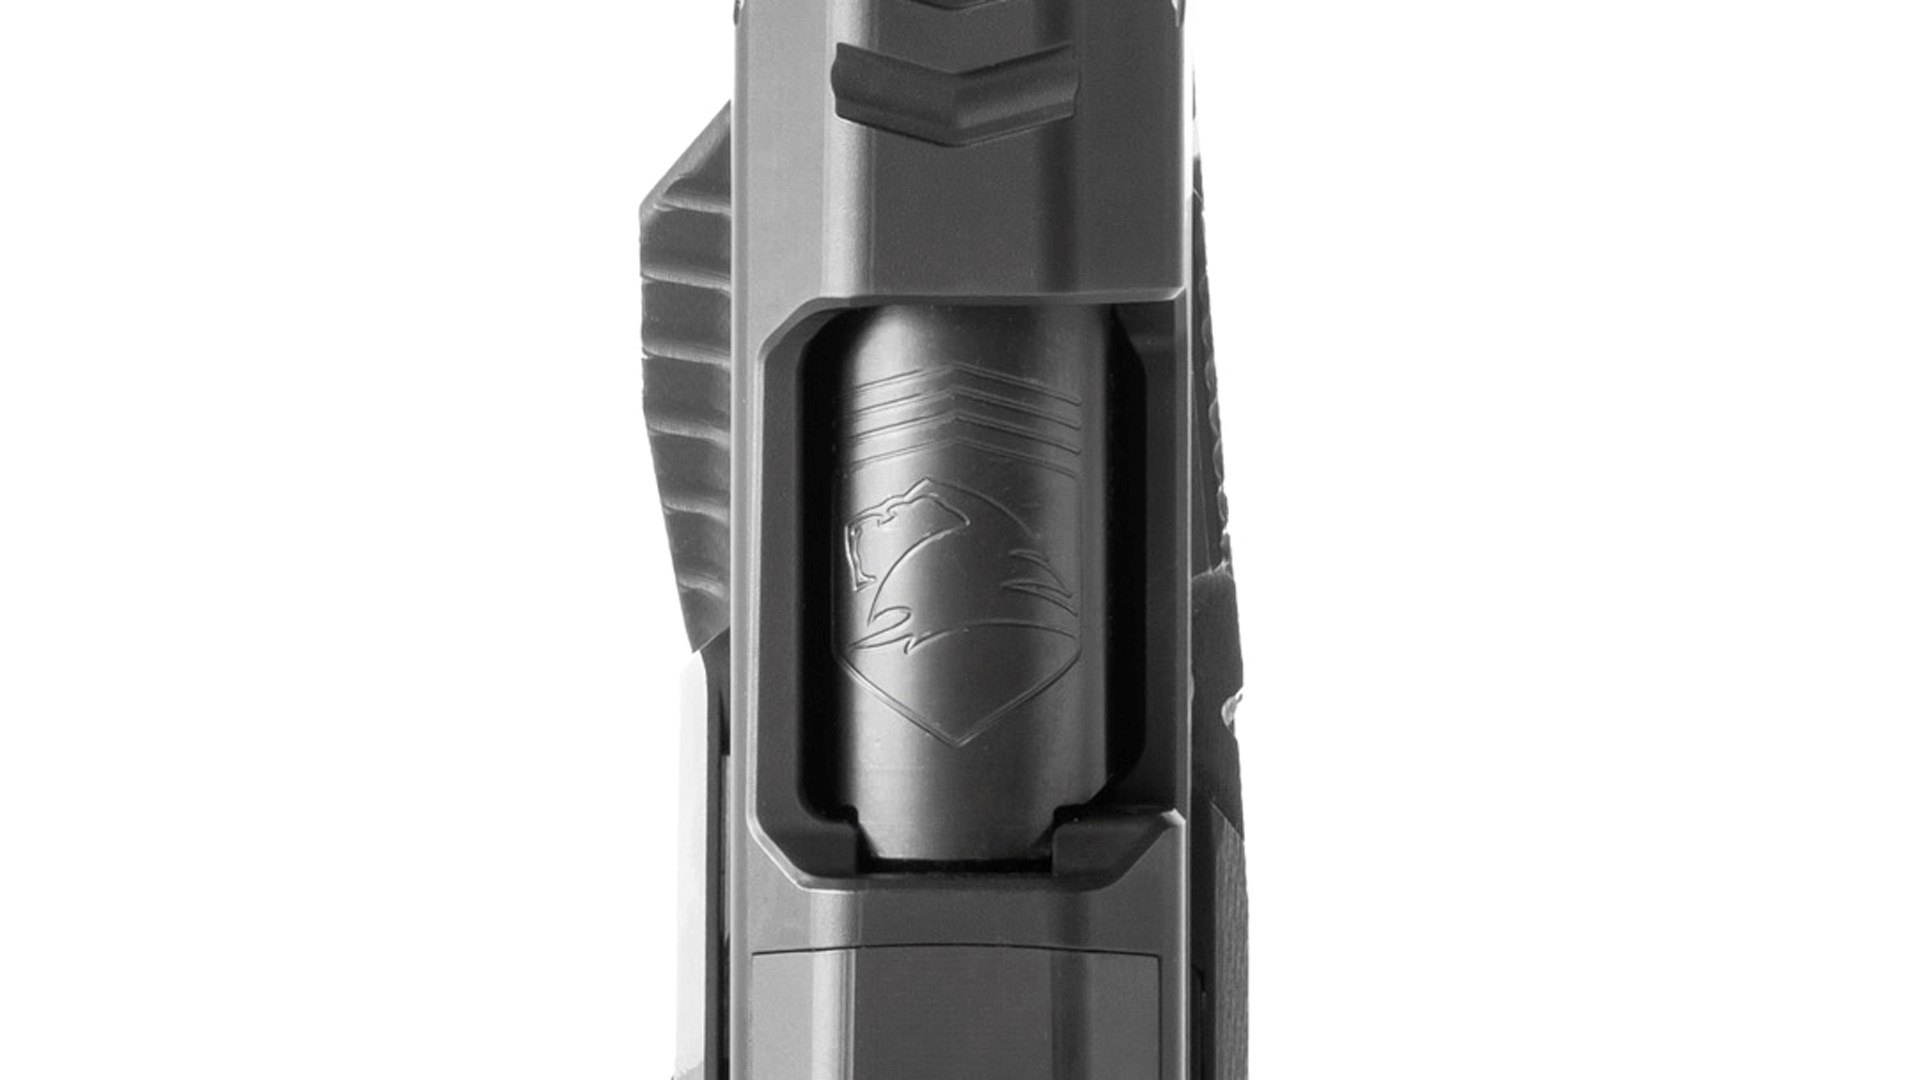 Top of the barrel hood and ejection port of the Lionheart Vulcan 9.